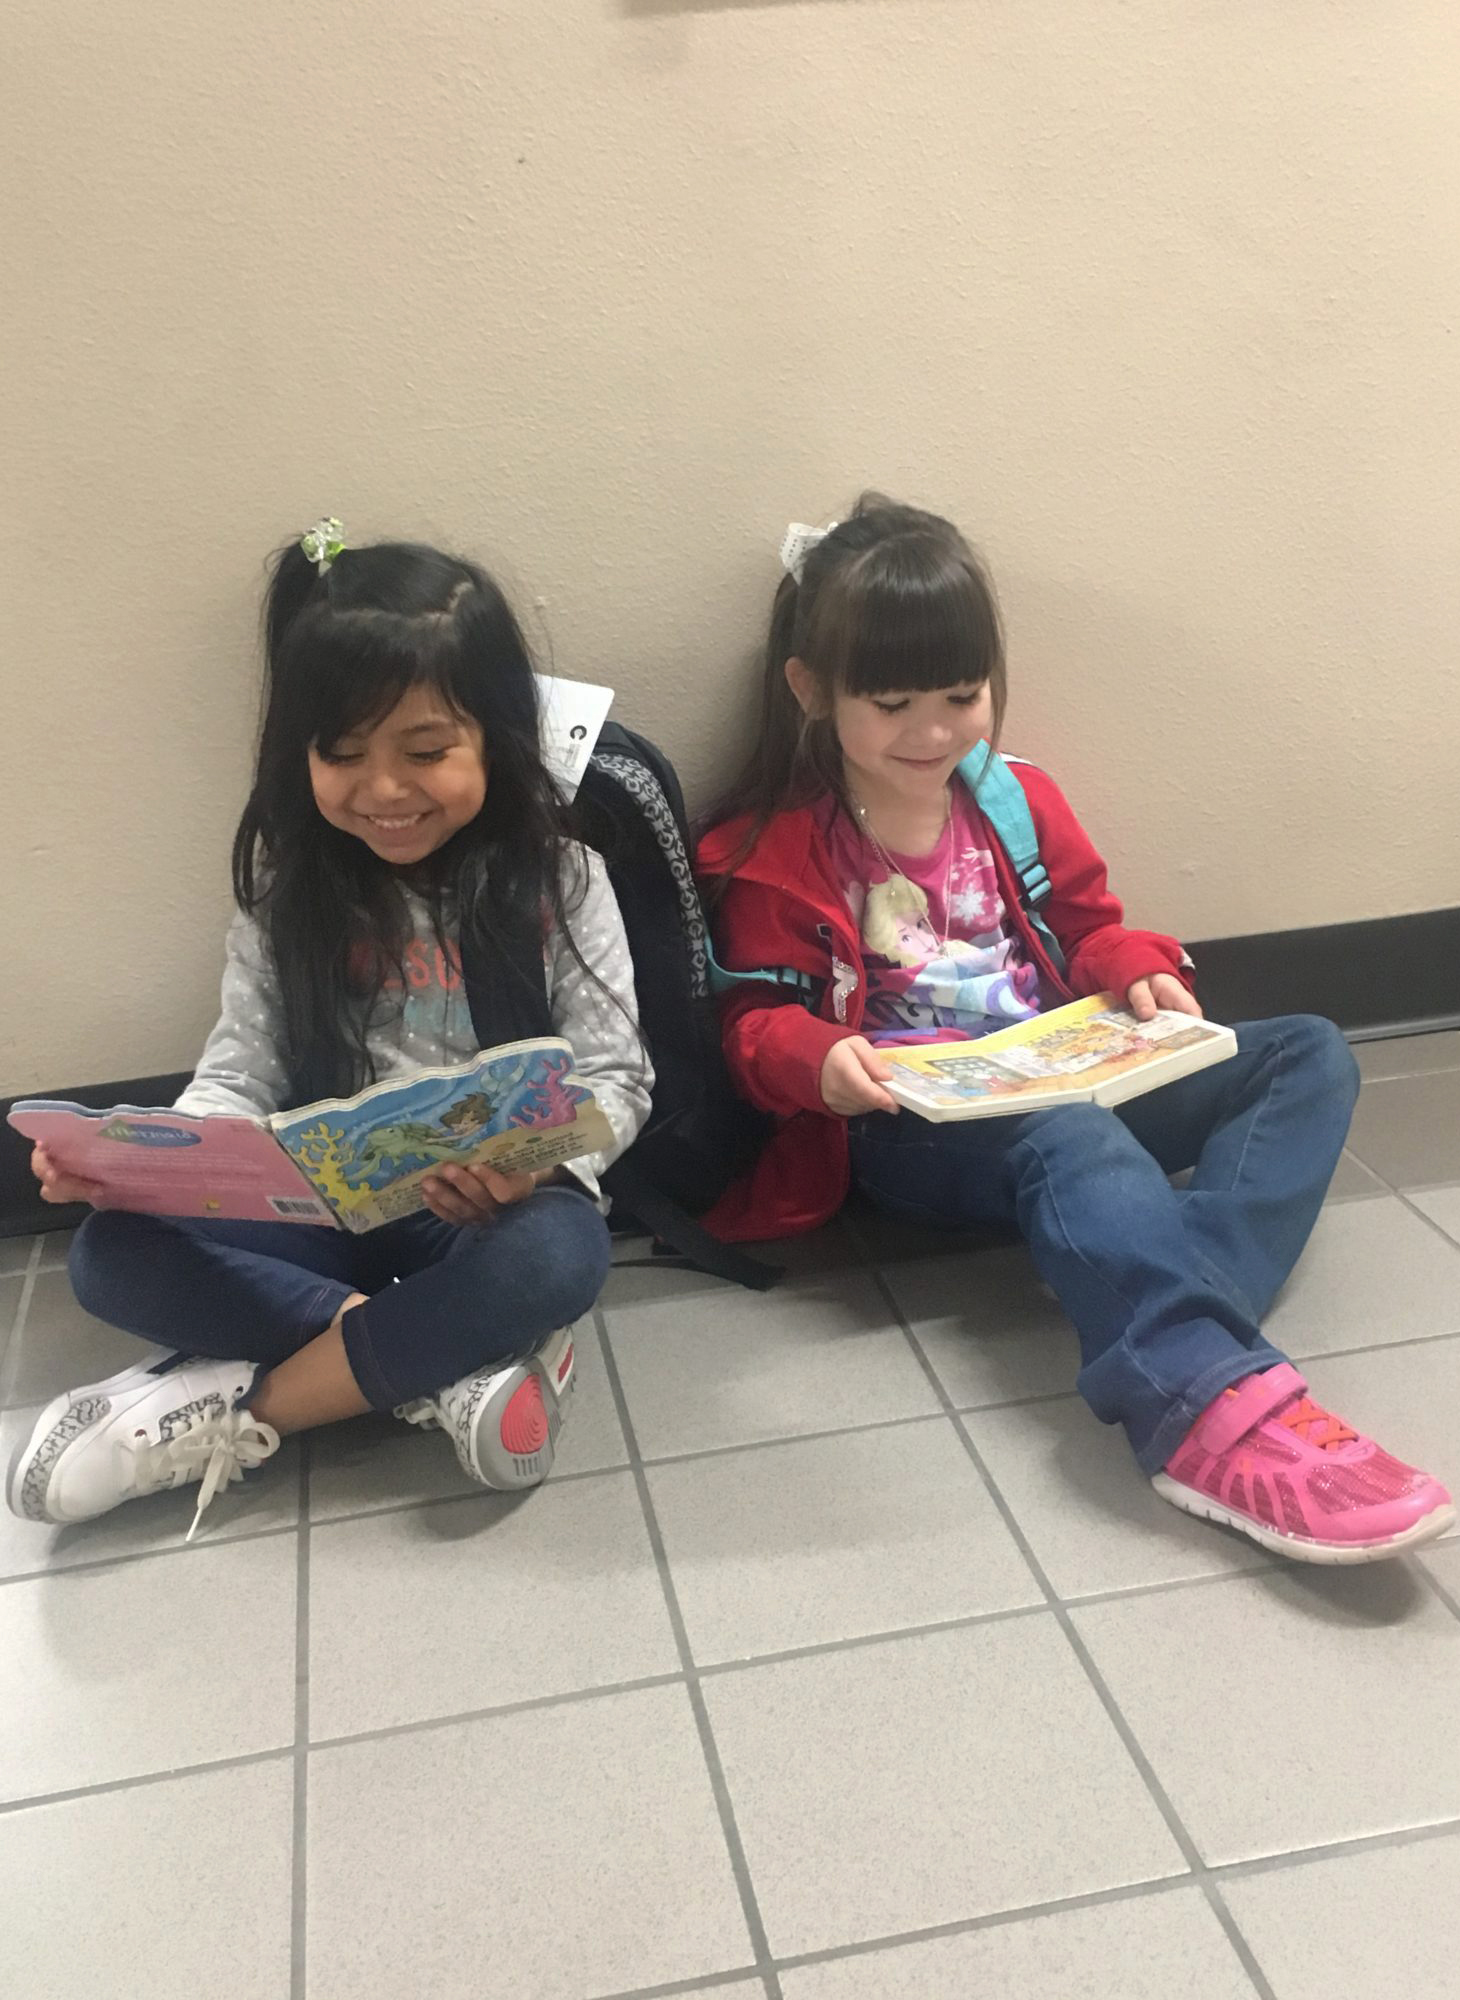 Friends at Creighton Elementary enjoy reading together.